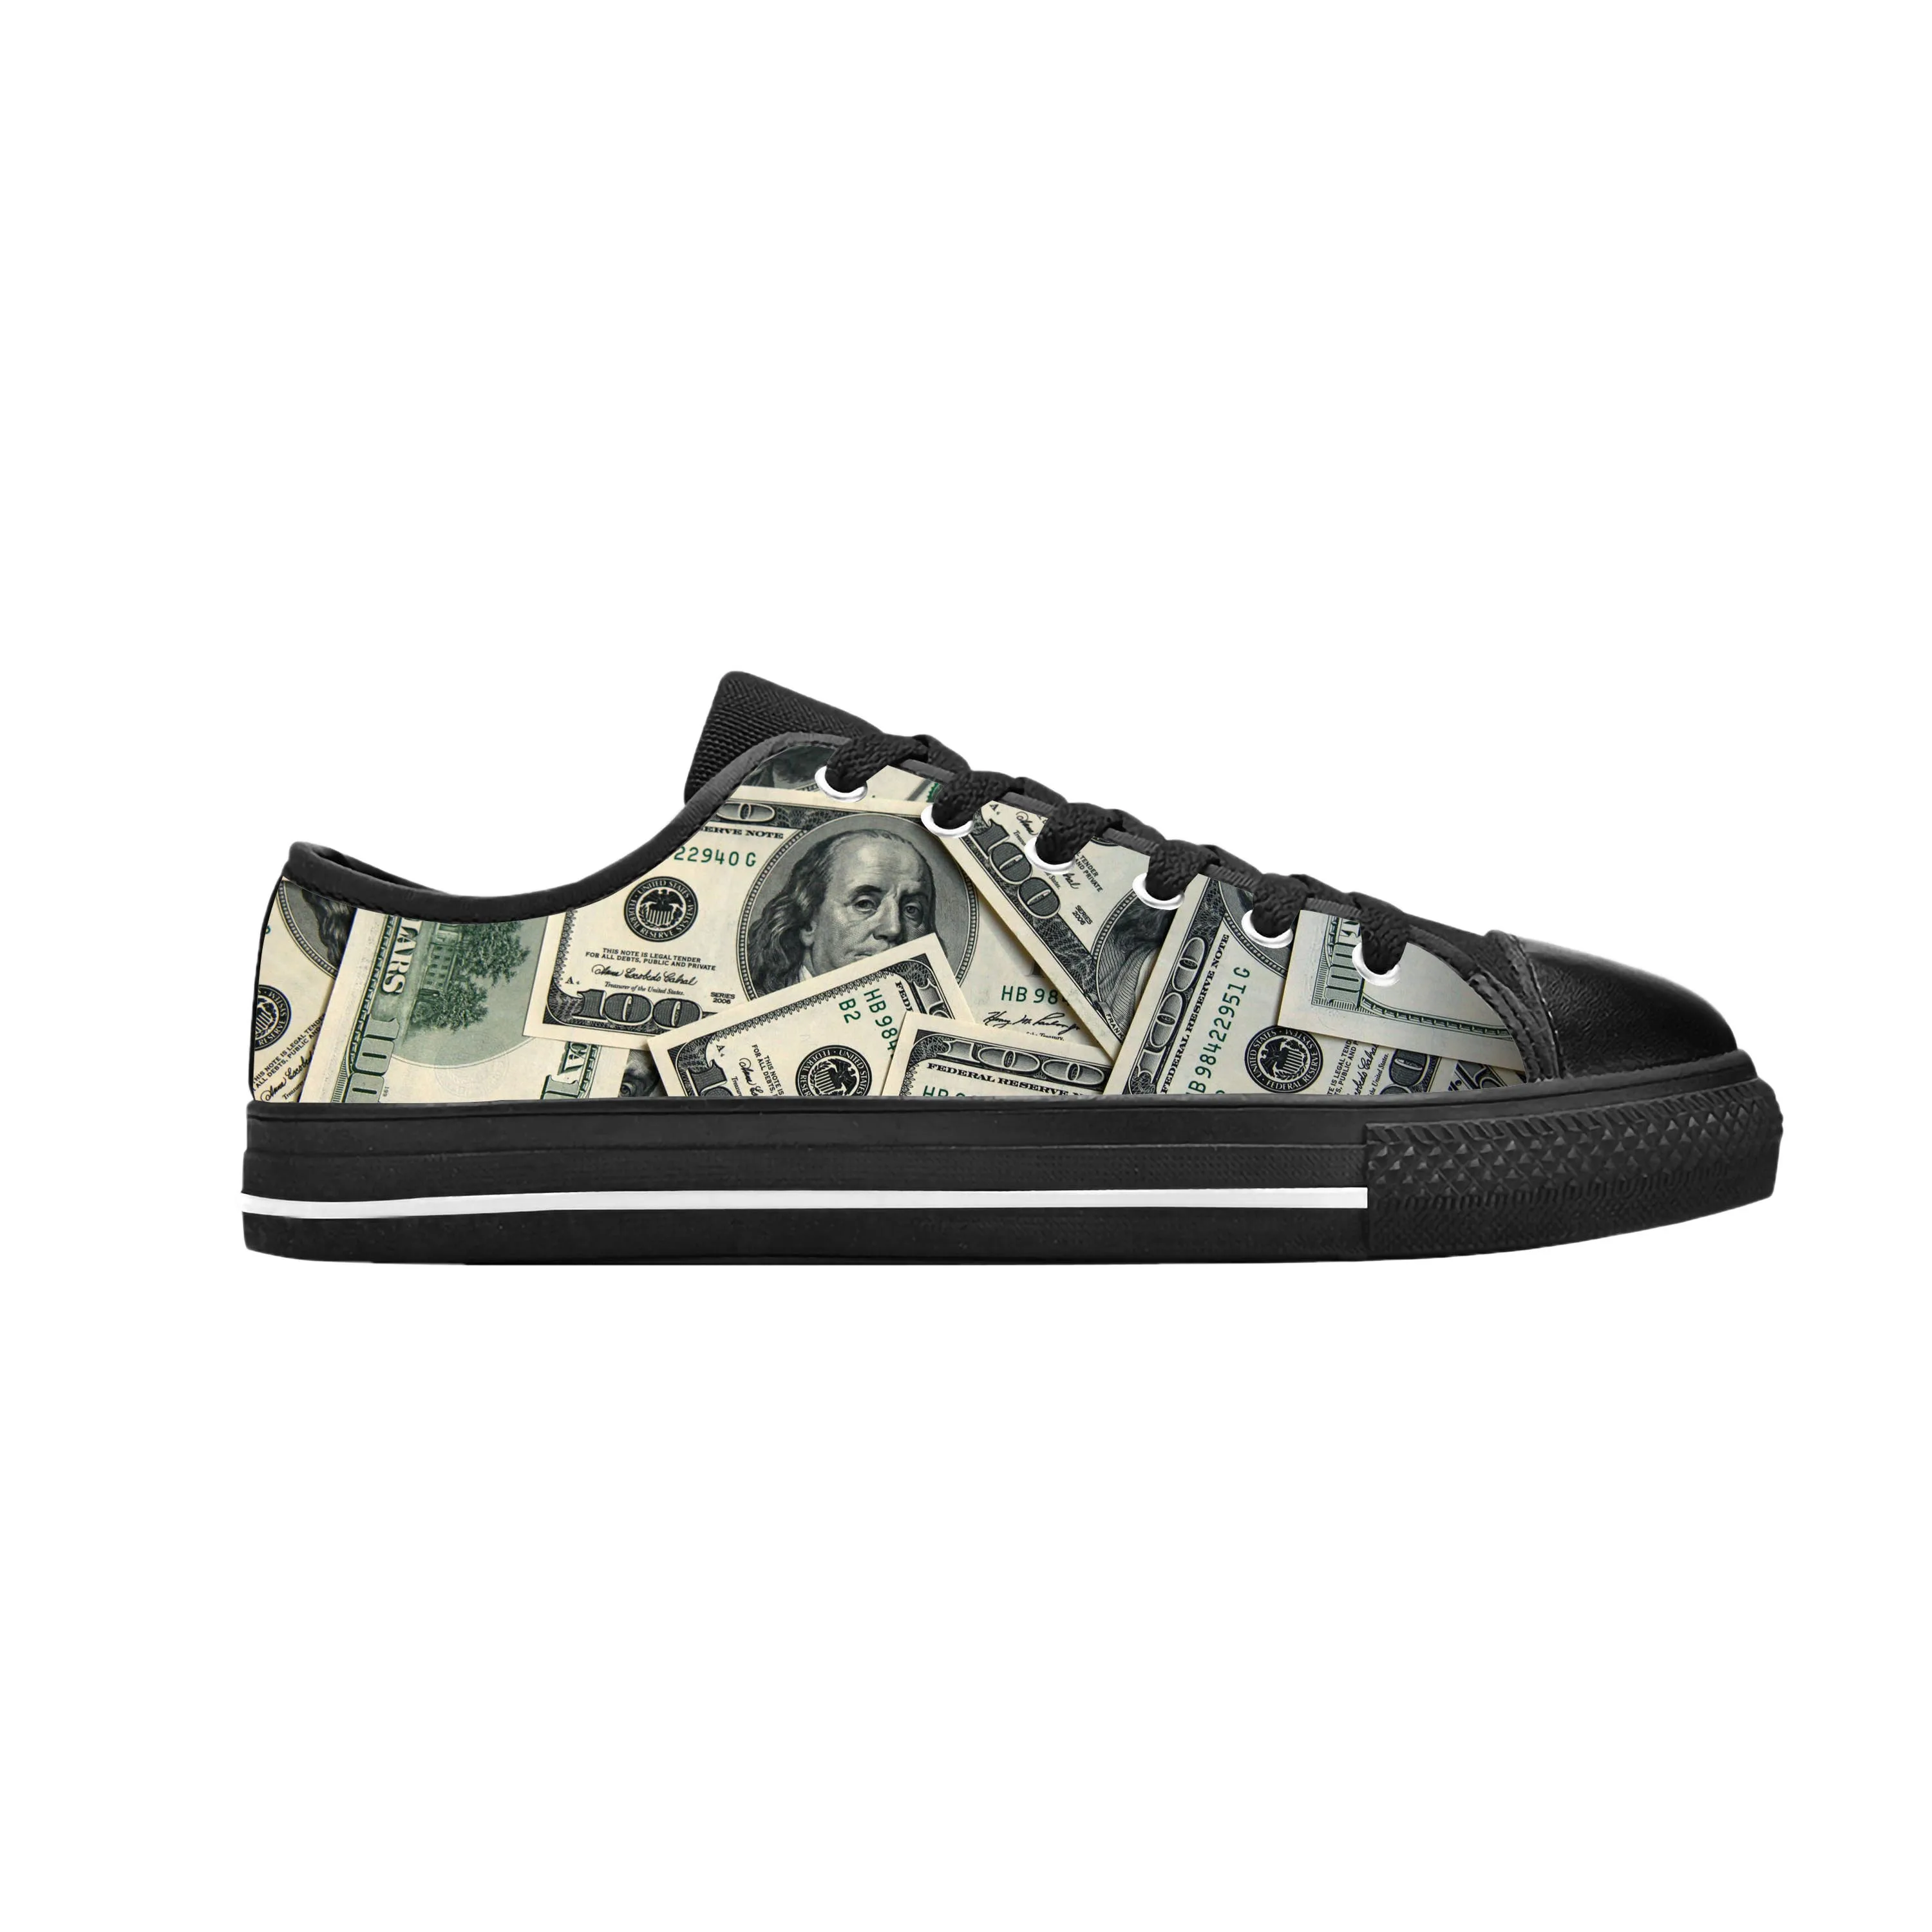 Gothic Dollar Bills Dollars Money Pattern Fashion Casual Cloth Shoes Low Top Comfortable Breathable 3D Print Men Women Sneakers che guevara communism socialism cuba cuban fashion casual cloth shoes low top comfortable breathable 3d print men women sneakers